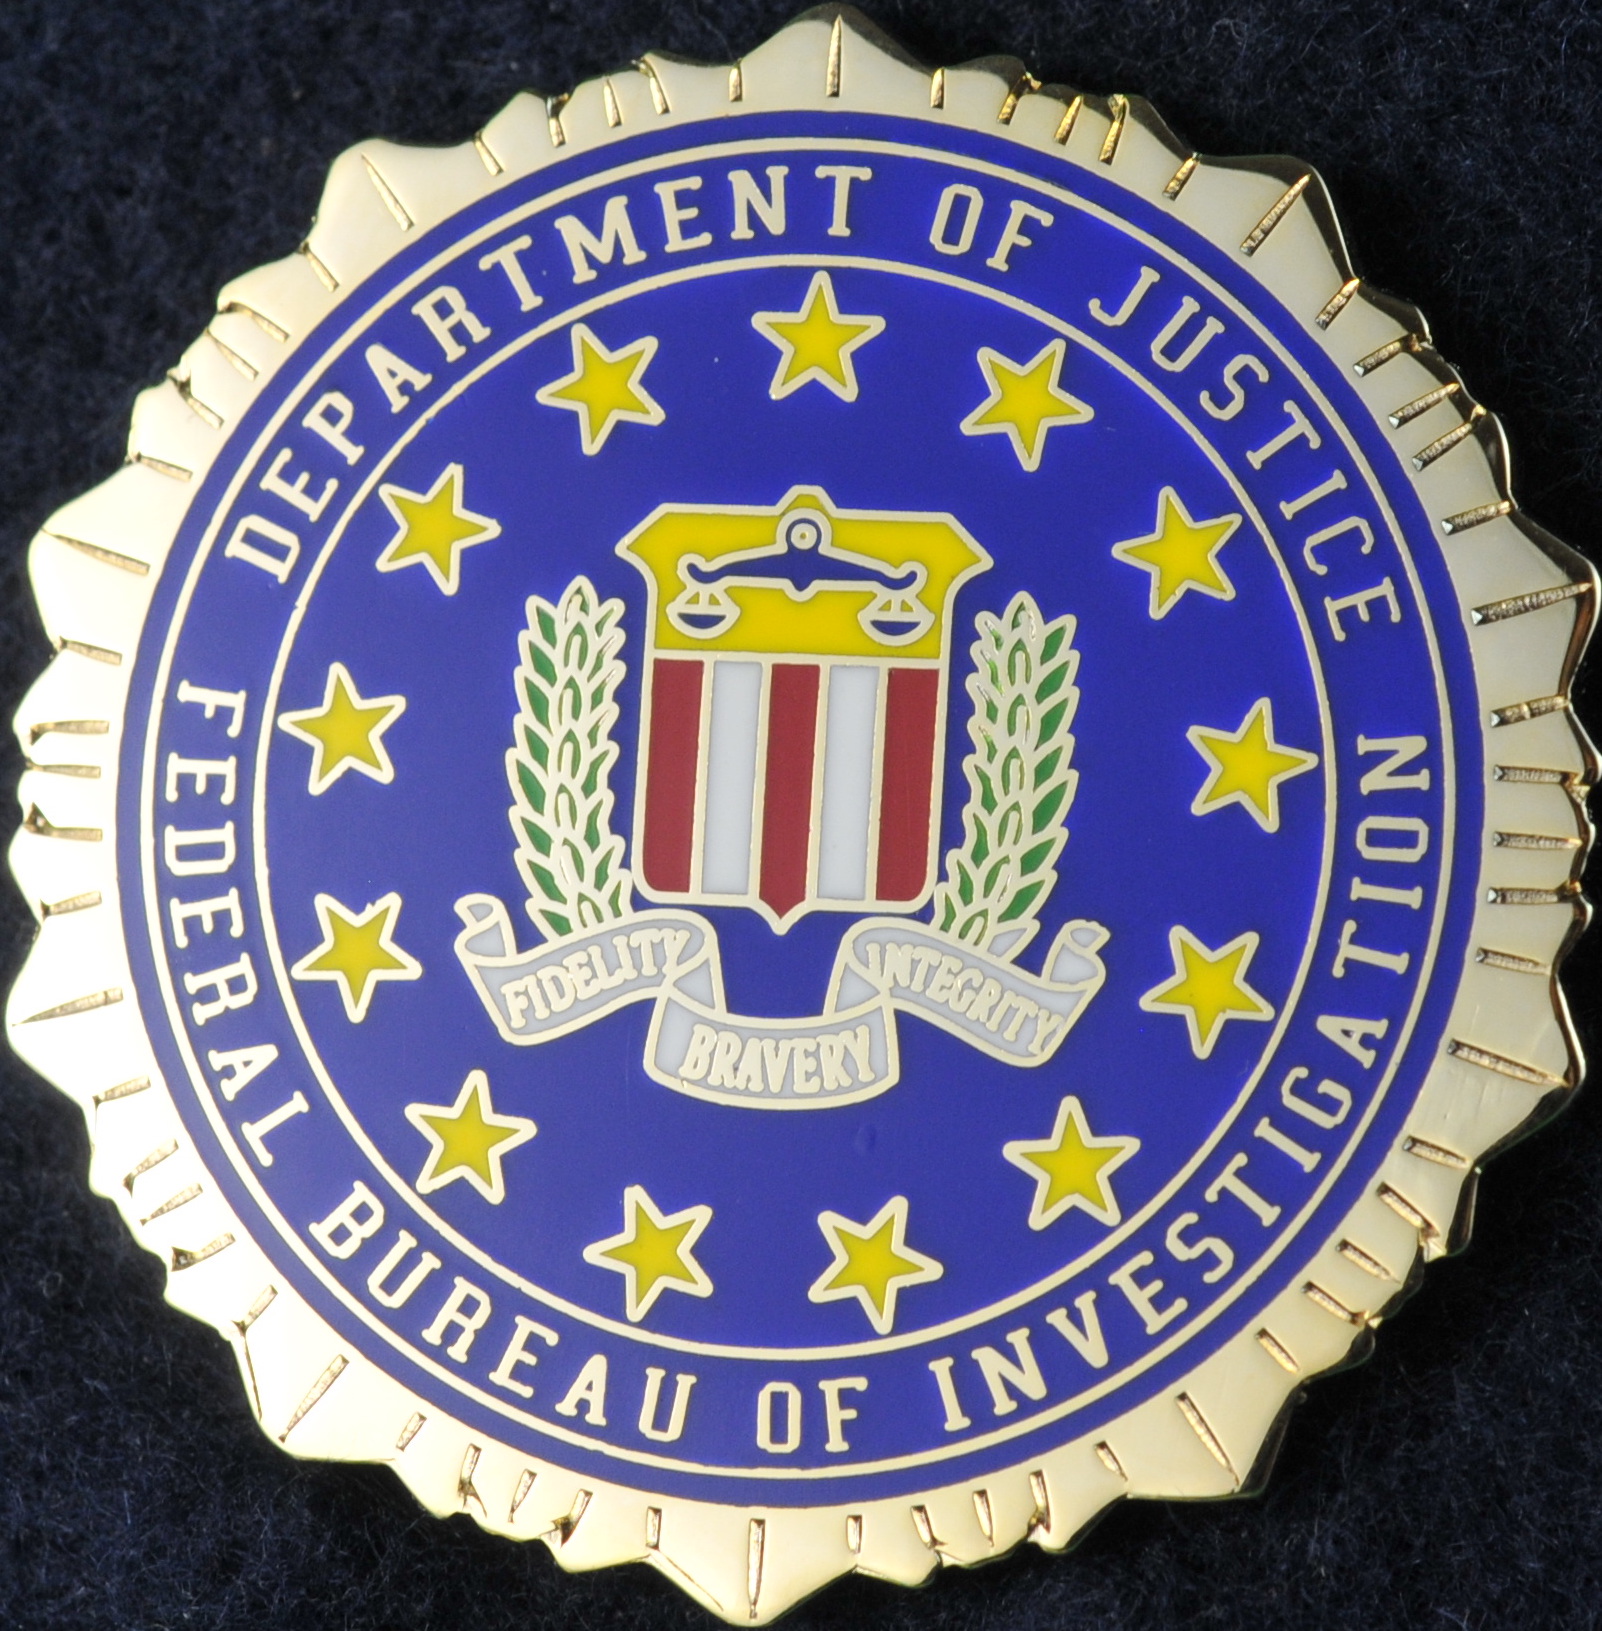 Federal Bureau of Investigation and White Collar